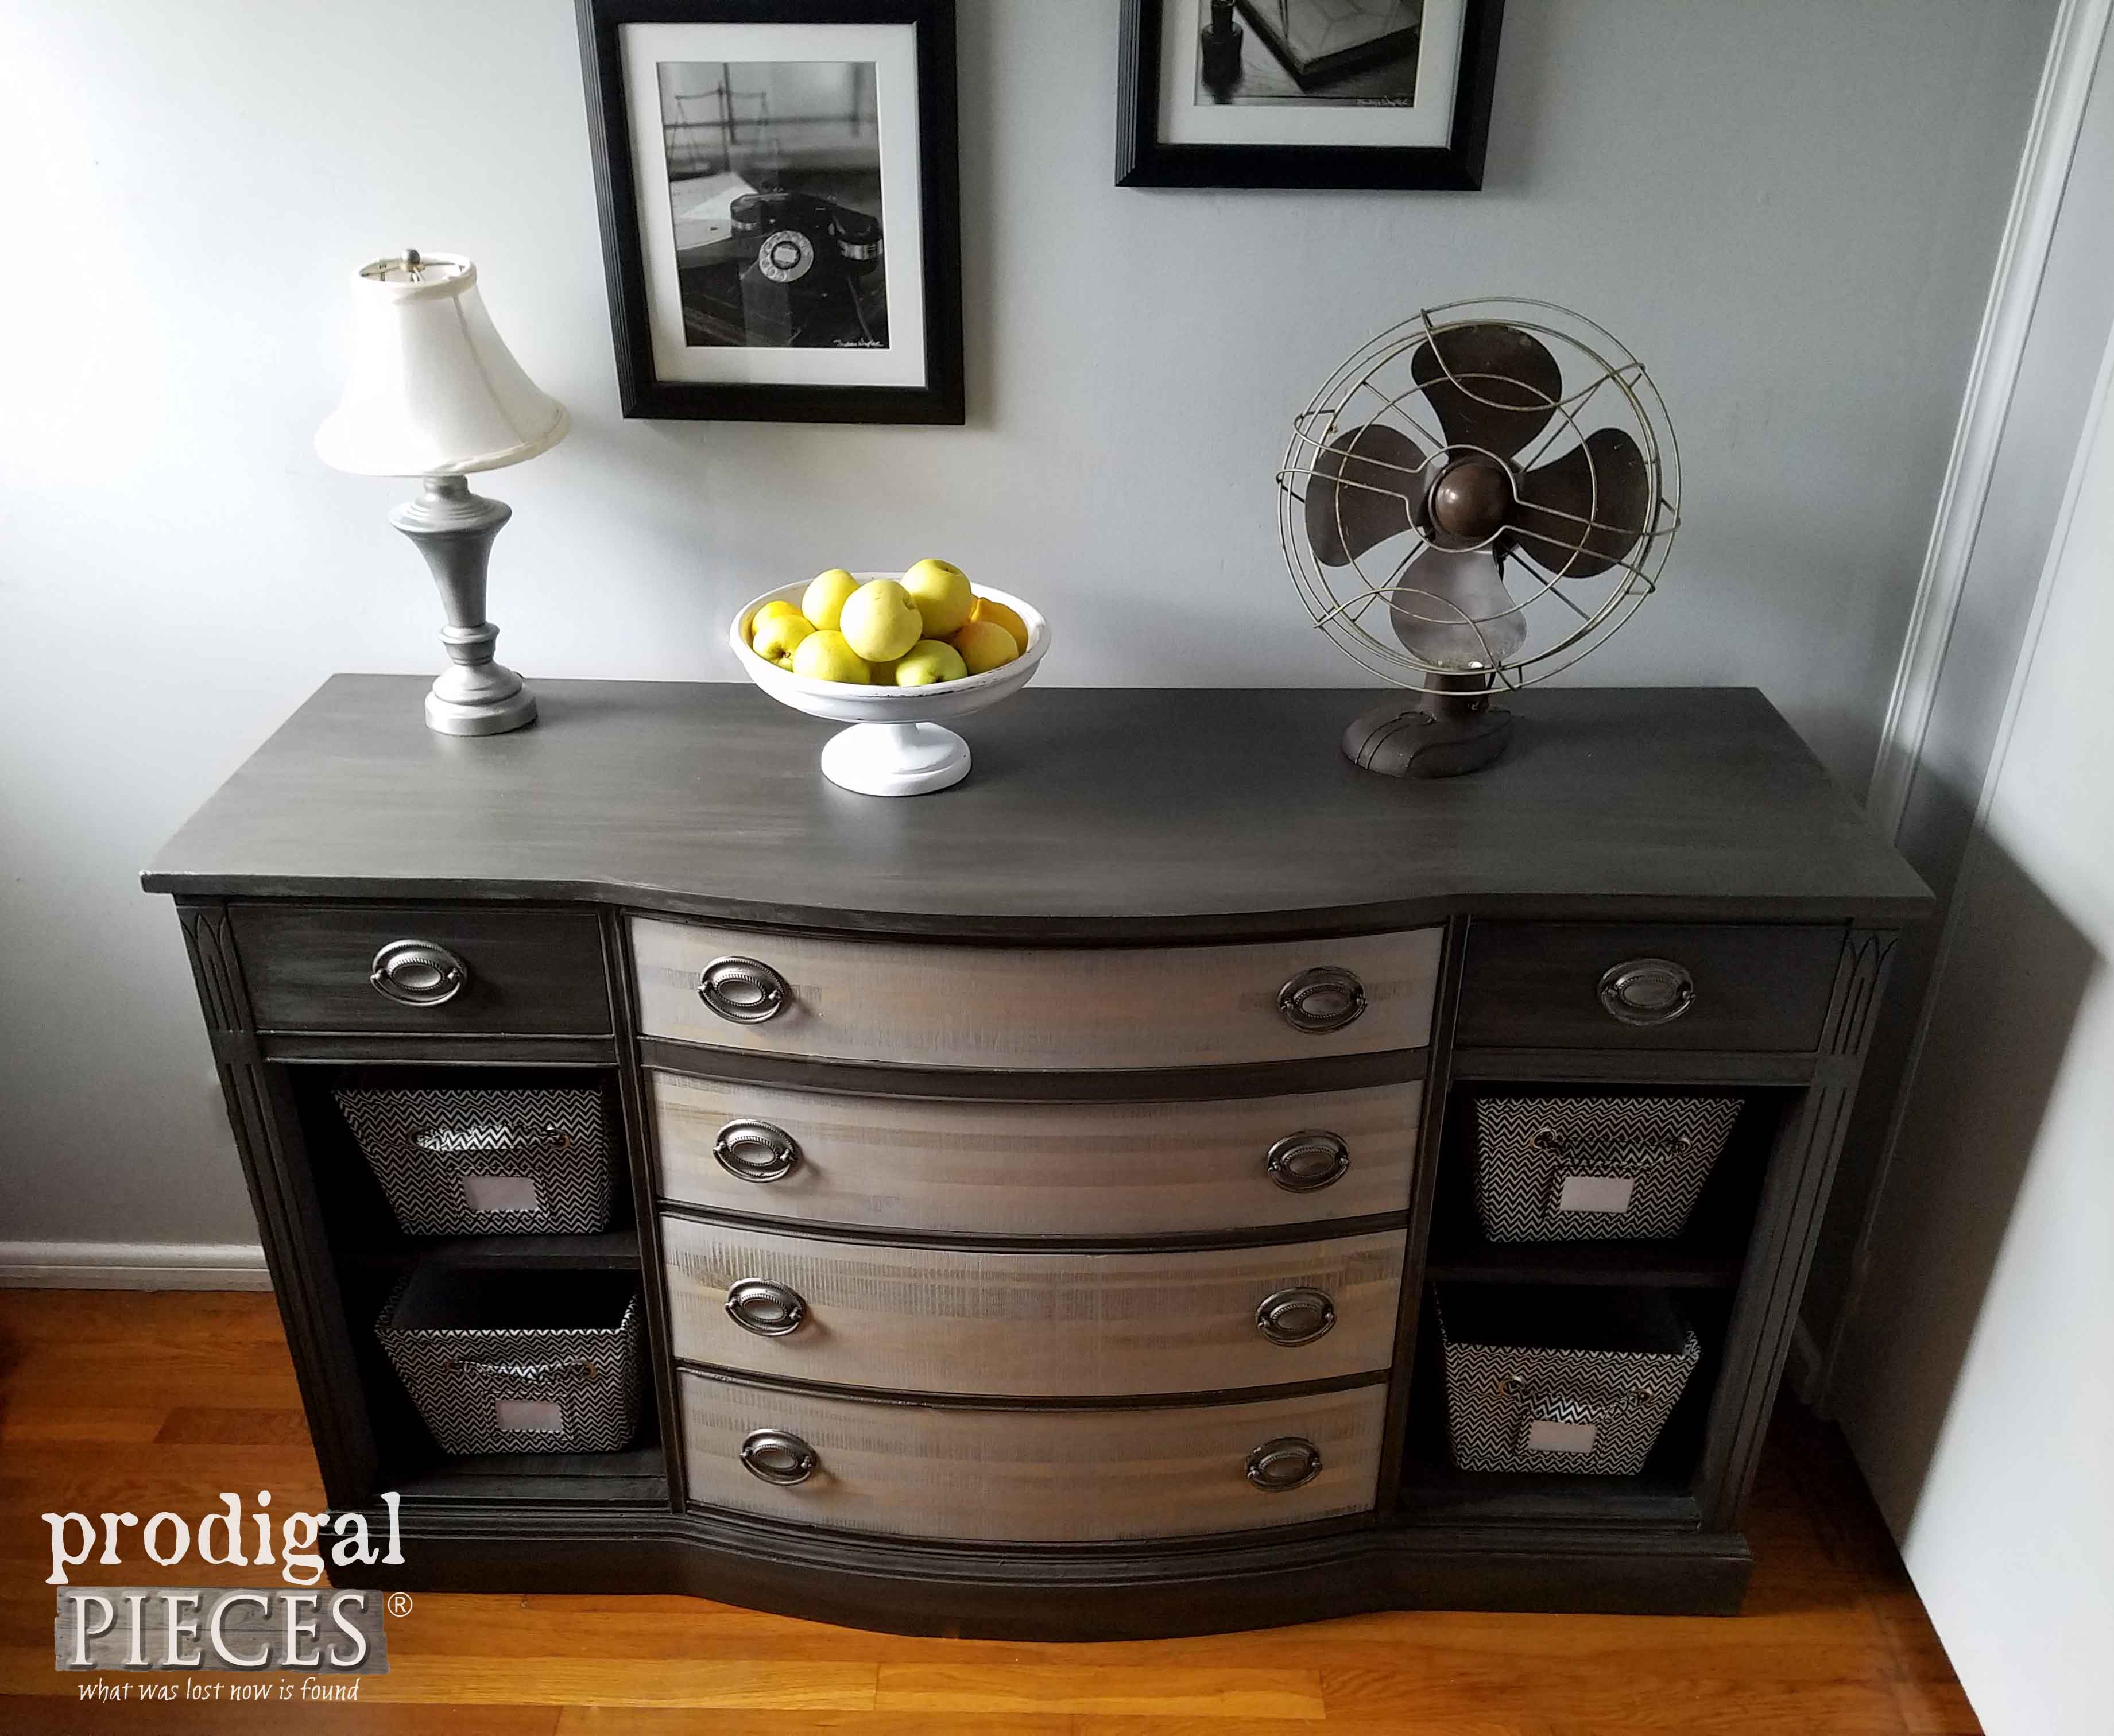 Updated Vintage Buffet Made Over by Teenage Boy | Prodigal Pieces | www.prodigalpieces.com